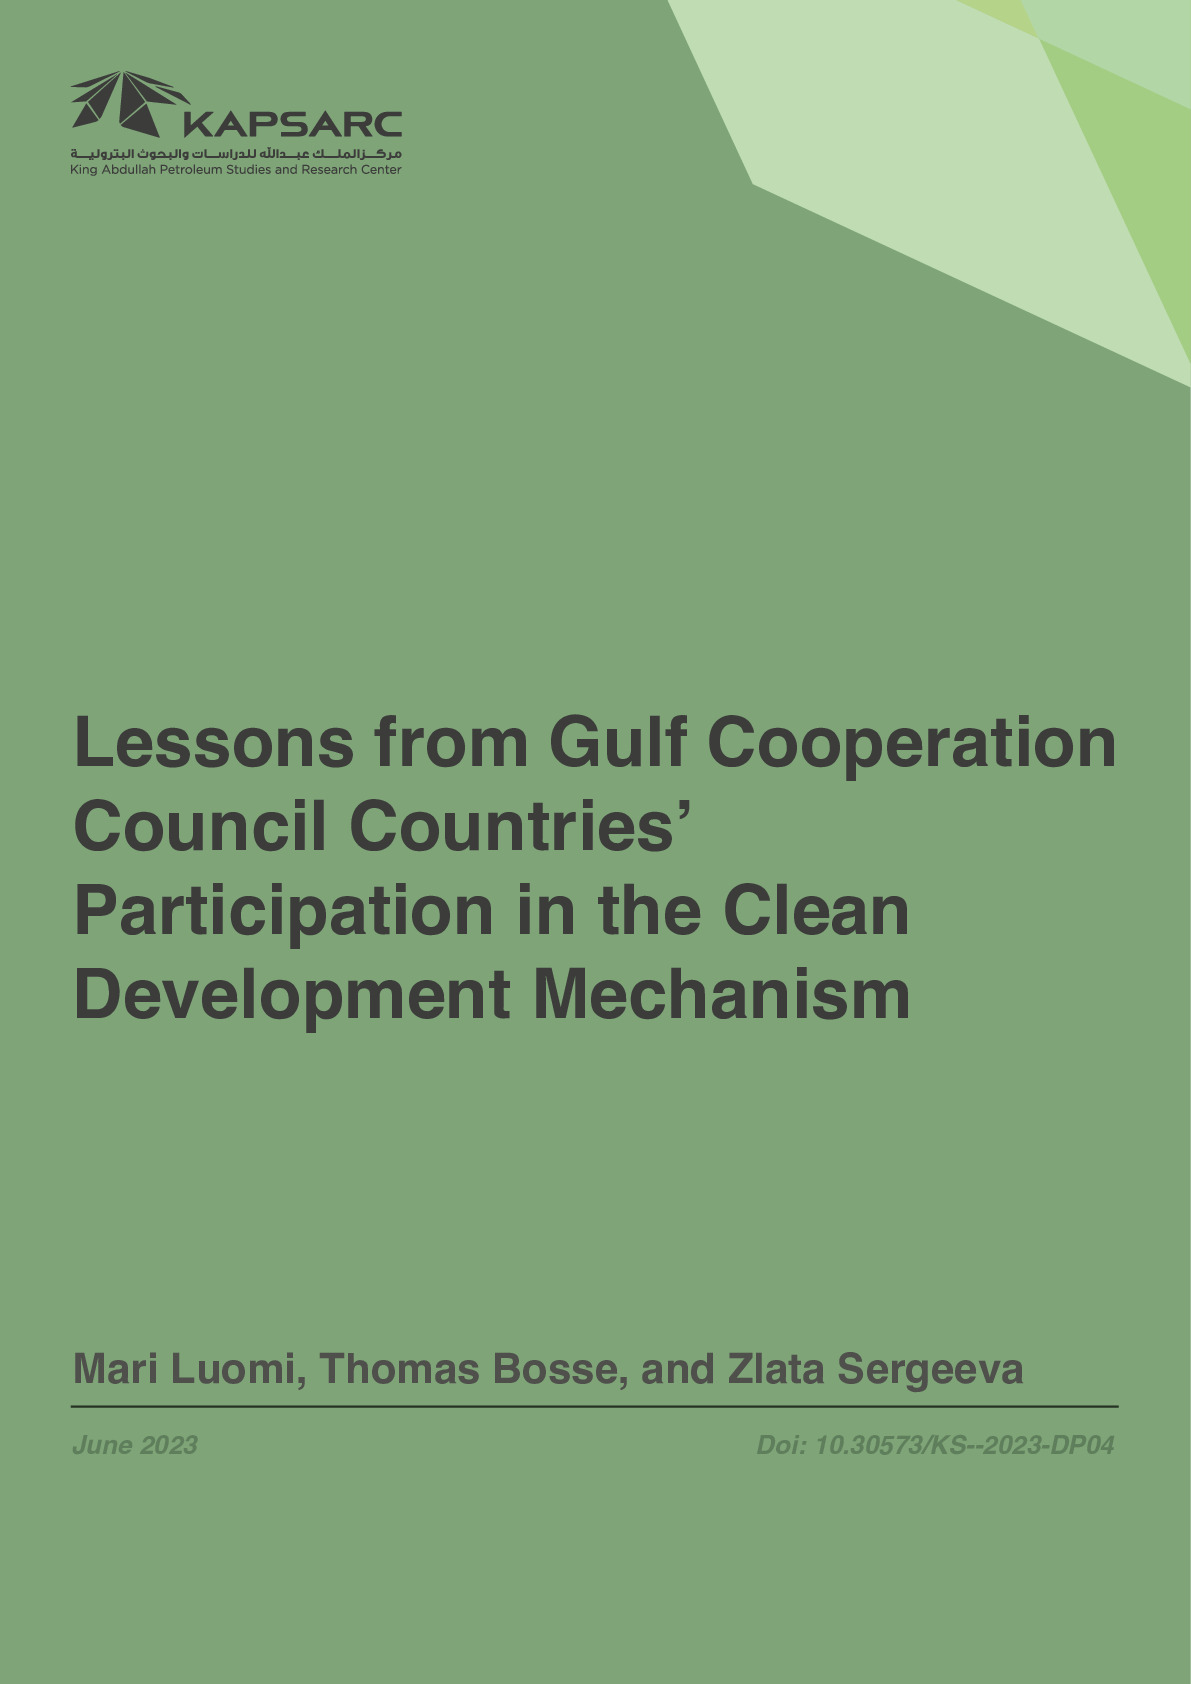 Lessons from Gulf Cooperation Council Countries’ Participation in the Clean Development Mechanism